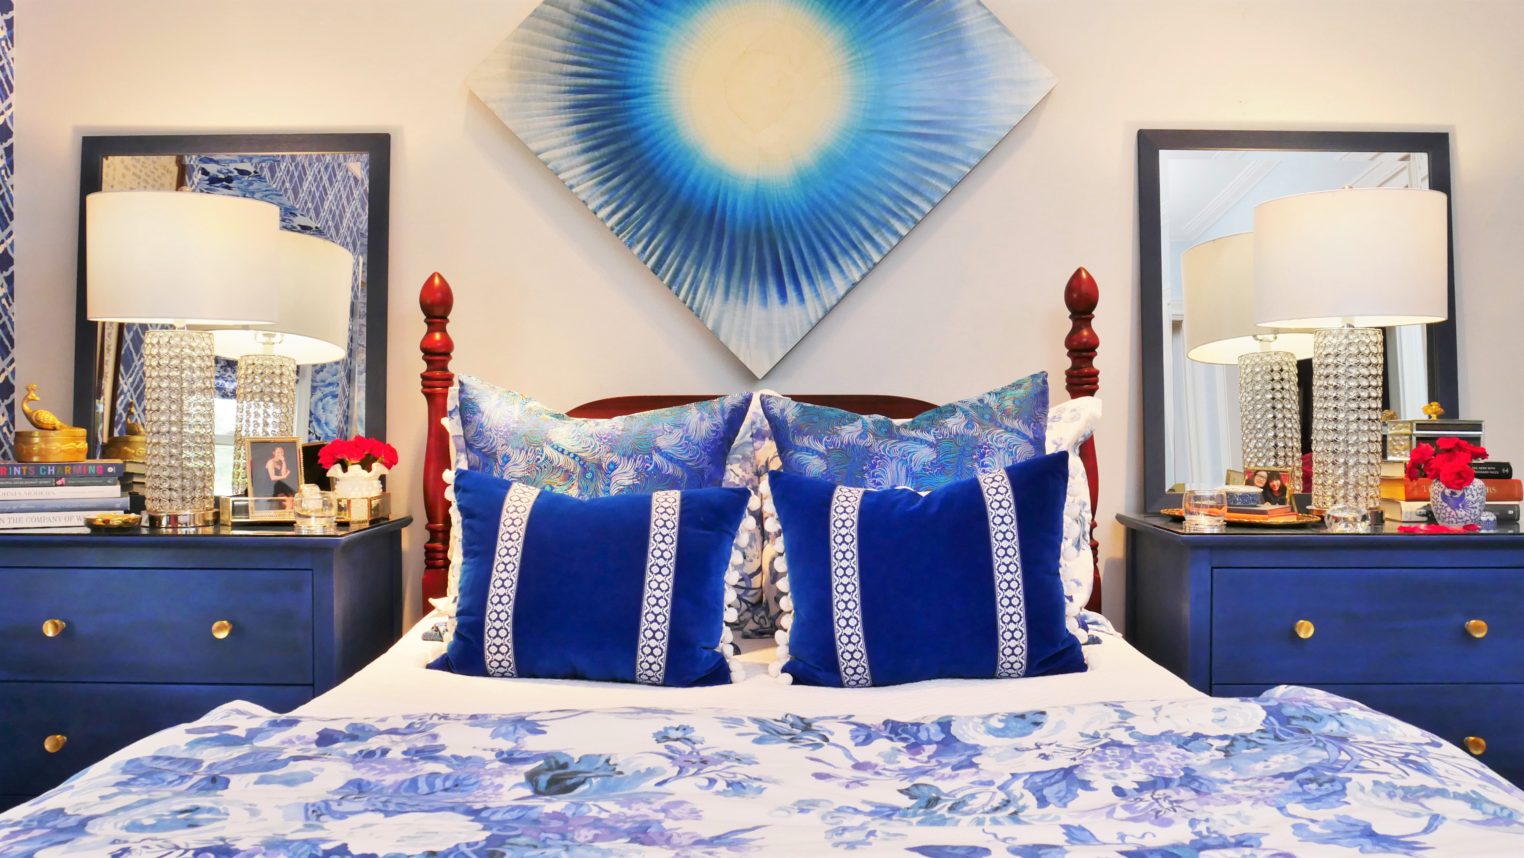 Styling Deborah Main pillows in layers with Peacock Alley luxury bedding for One Room Challenge. Details on The Pillow Goddess blog!